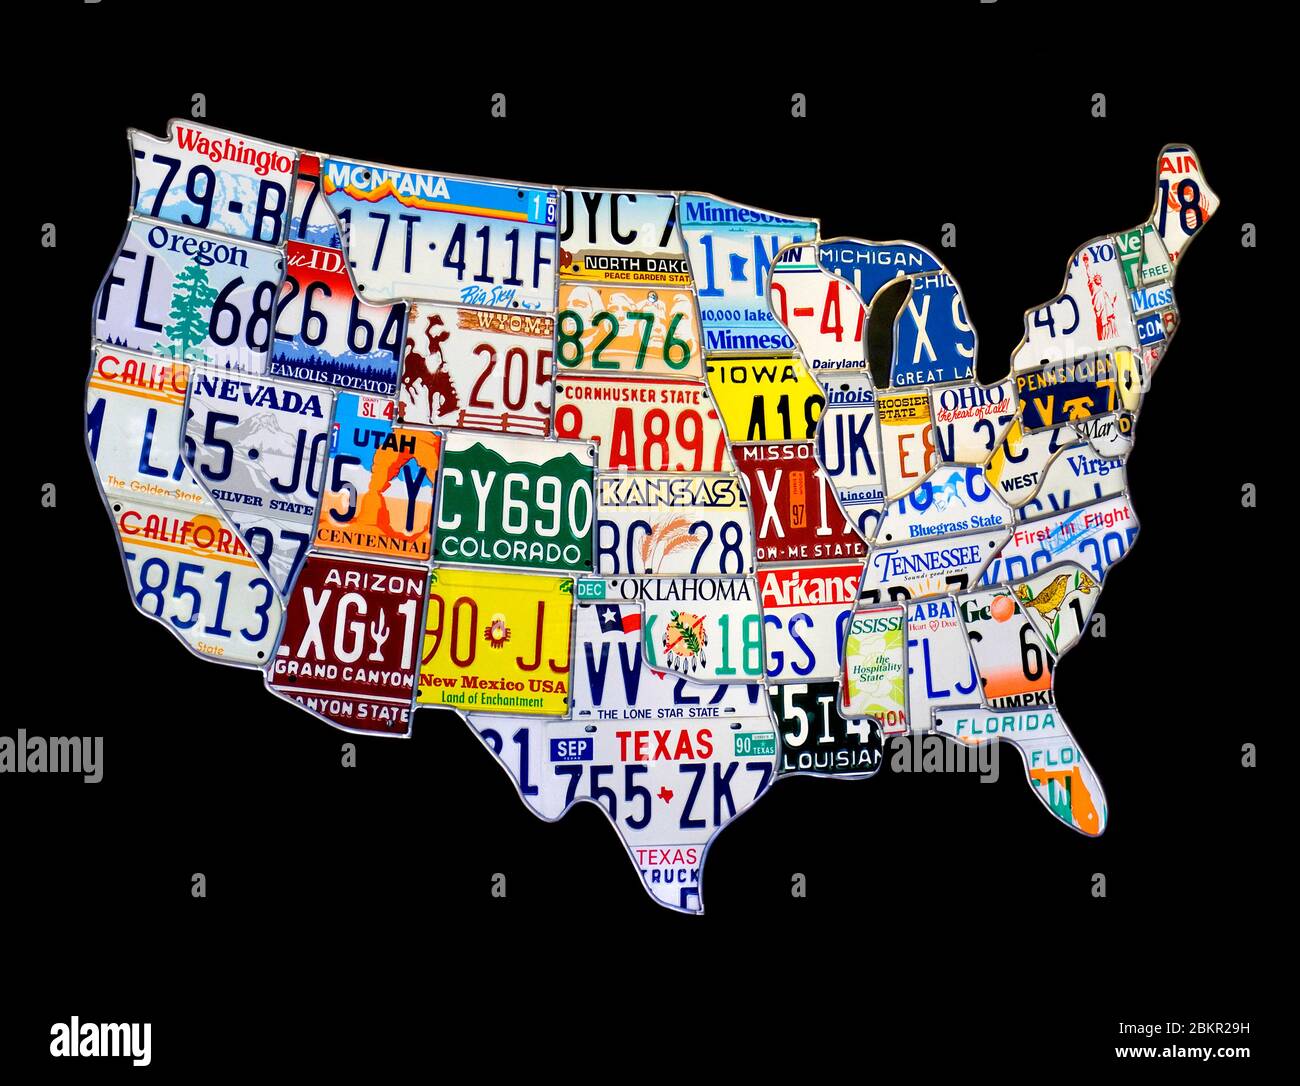 VEHICLE CAR PLATES USA ART Map of the United States of America made from a collage of geographically placed vehicle registration plates Stock Photo